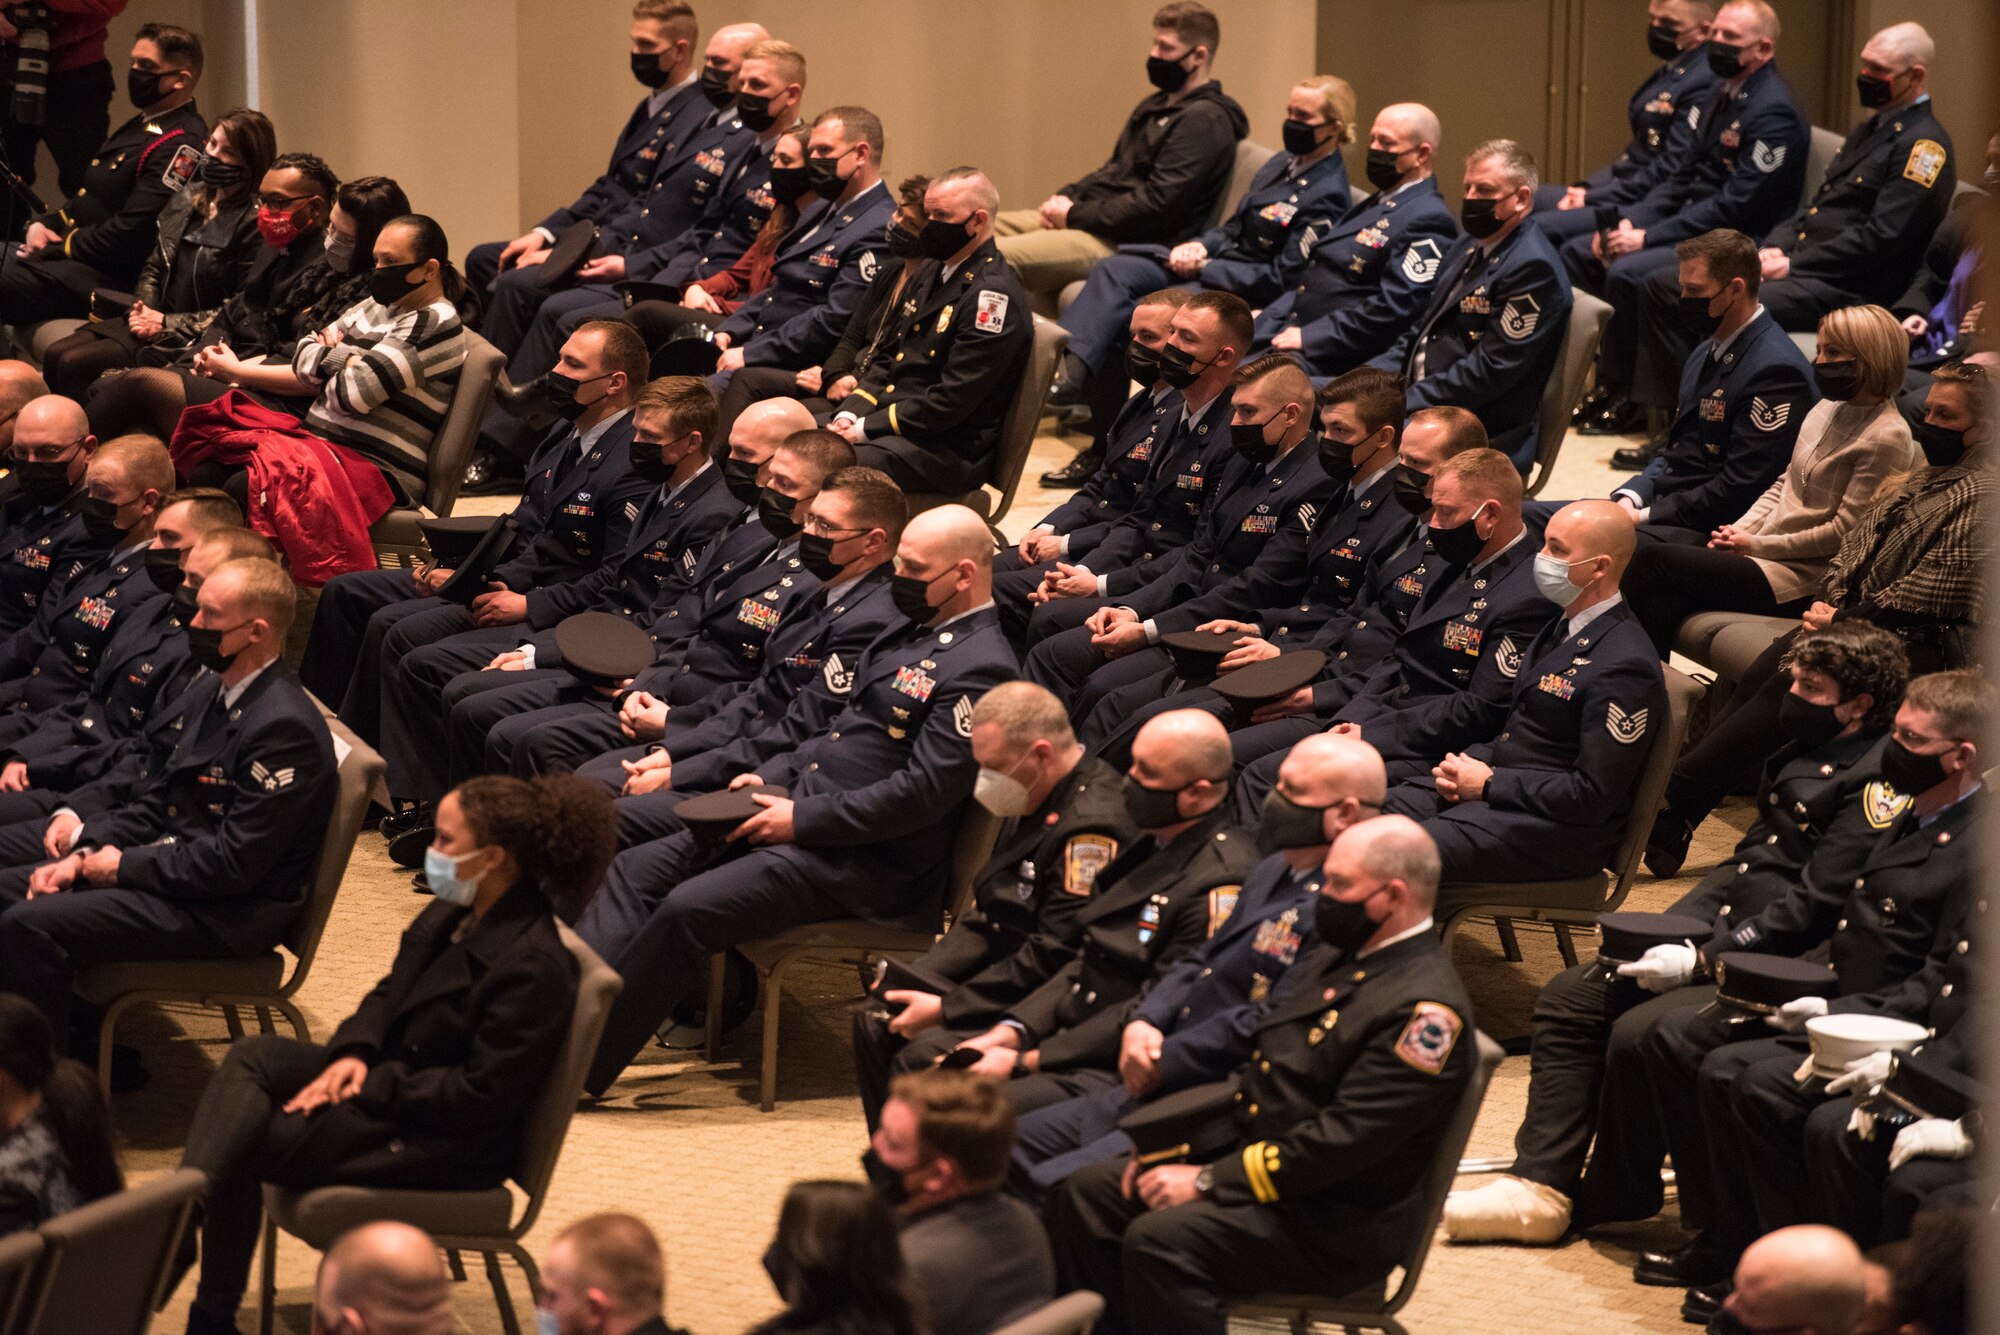 Airmen and firefighters attend the funeral service of Senior Airman Logan Young at Victory Church in Winchester, Va., Jan. 7, 2021. Young was a firefighter for the 167th Civil Engineering Squadron and was killed while battling an off-base fire on Dec. 27, 2020.